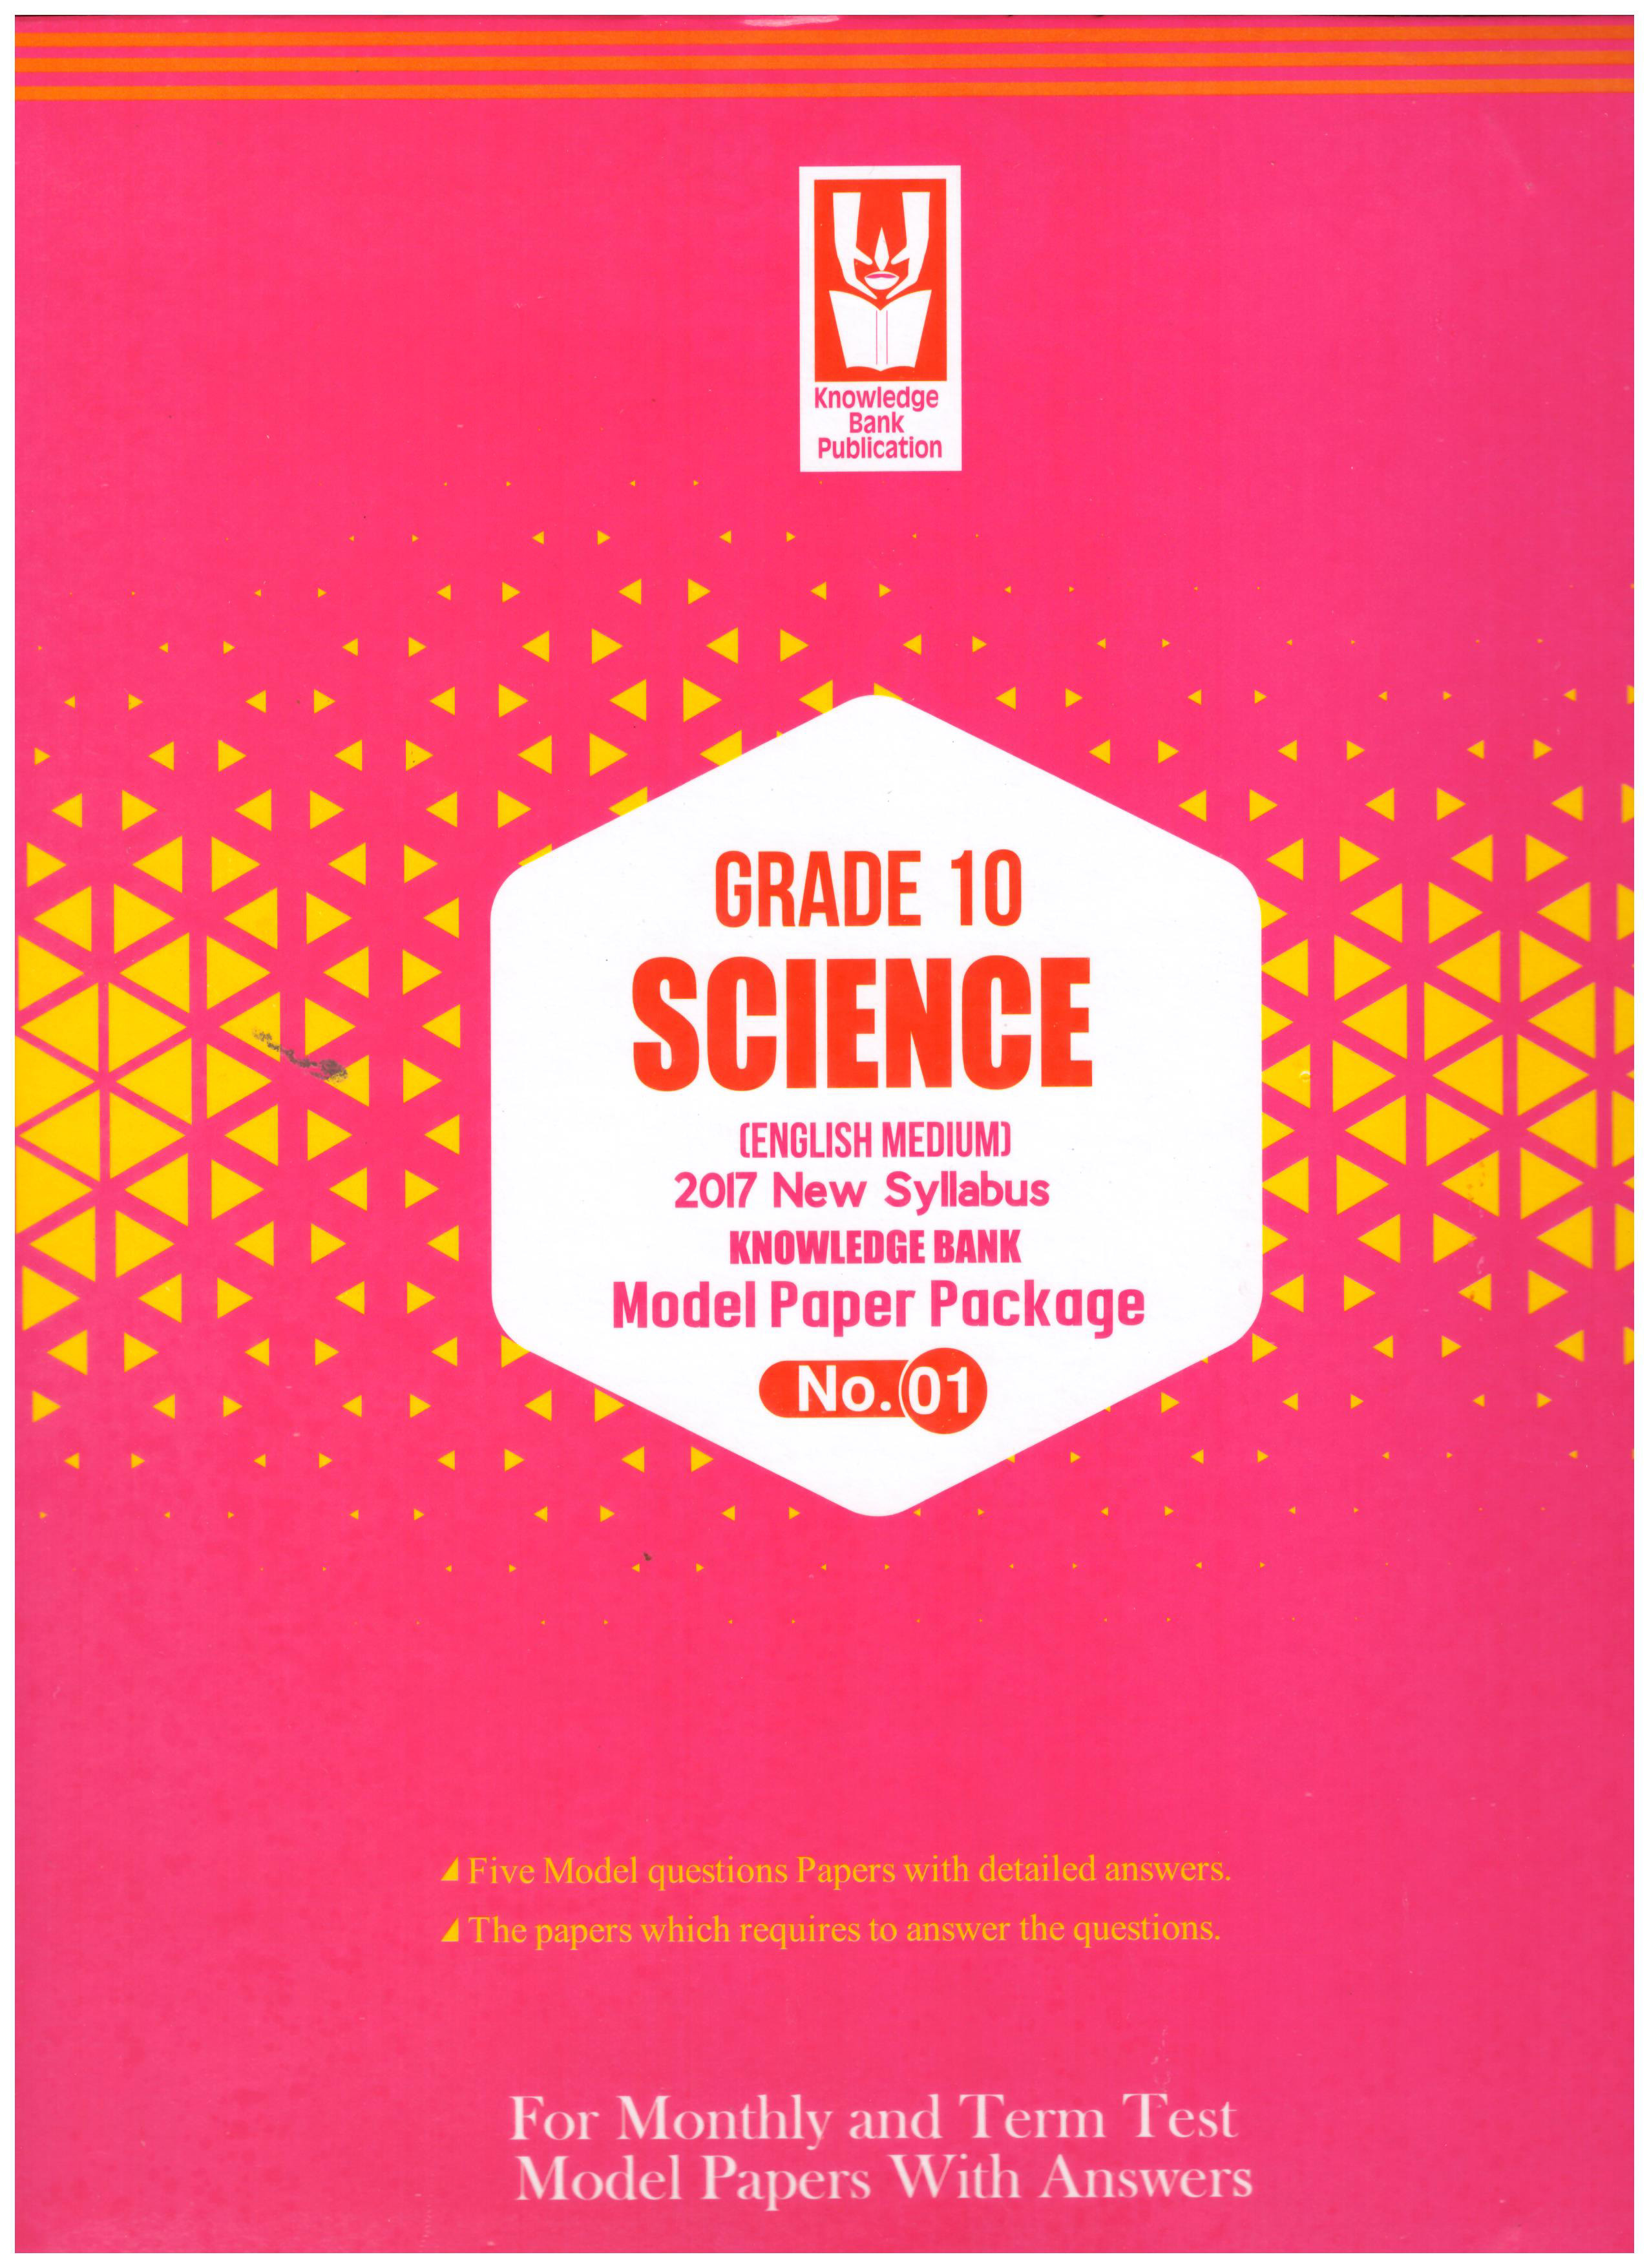 Knowledge Bank Grade 10 Science No.01 Model Paper Package ( New Syllabus )